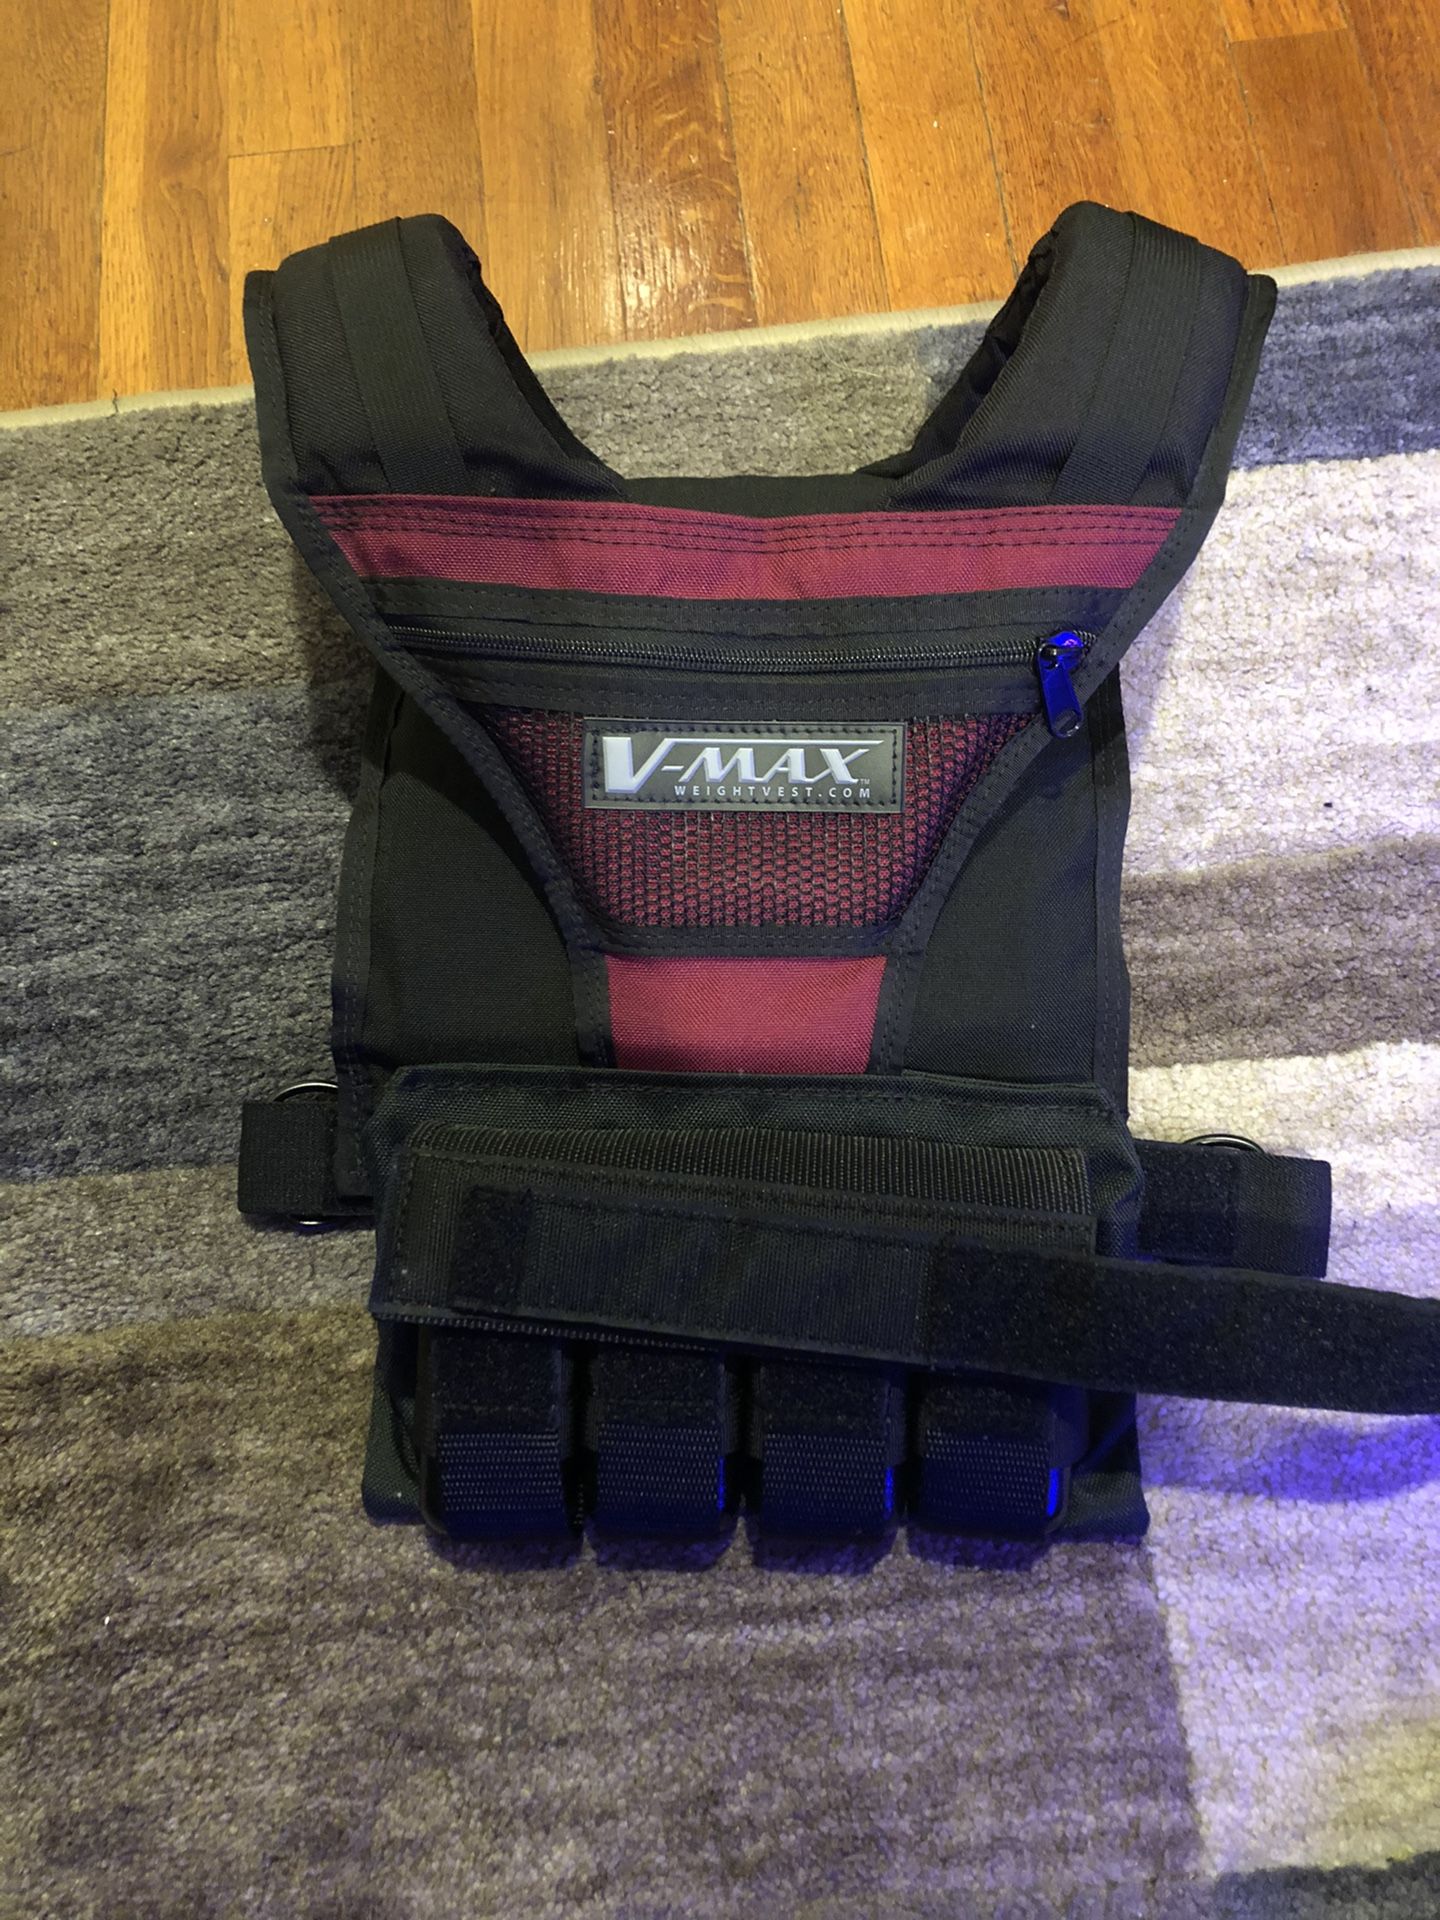 Vmax weighted vest